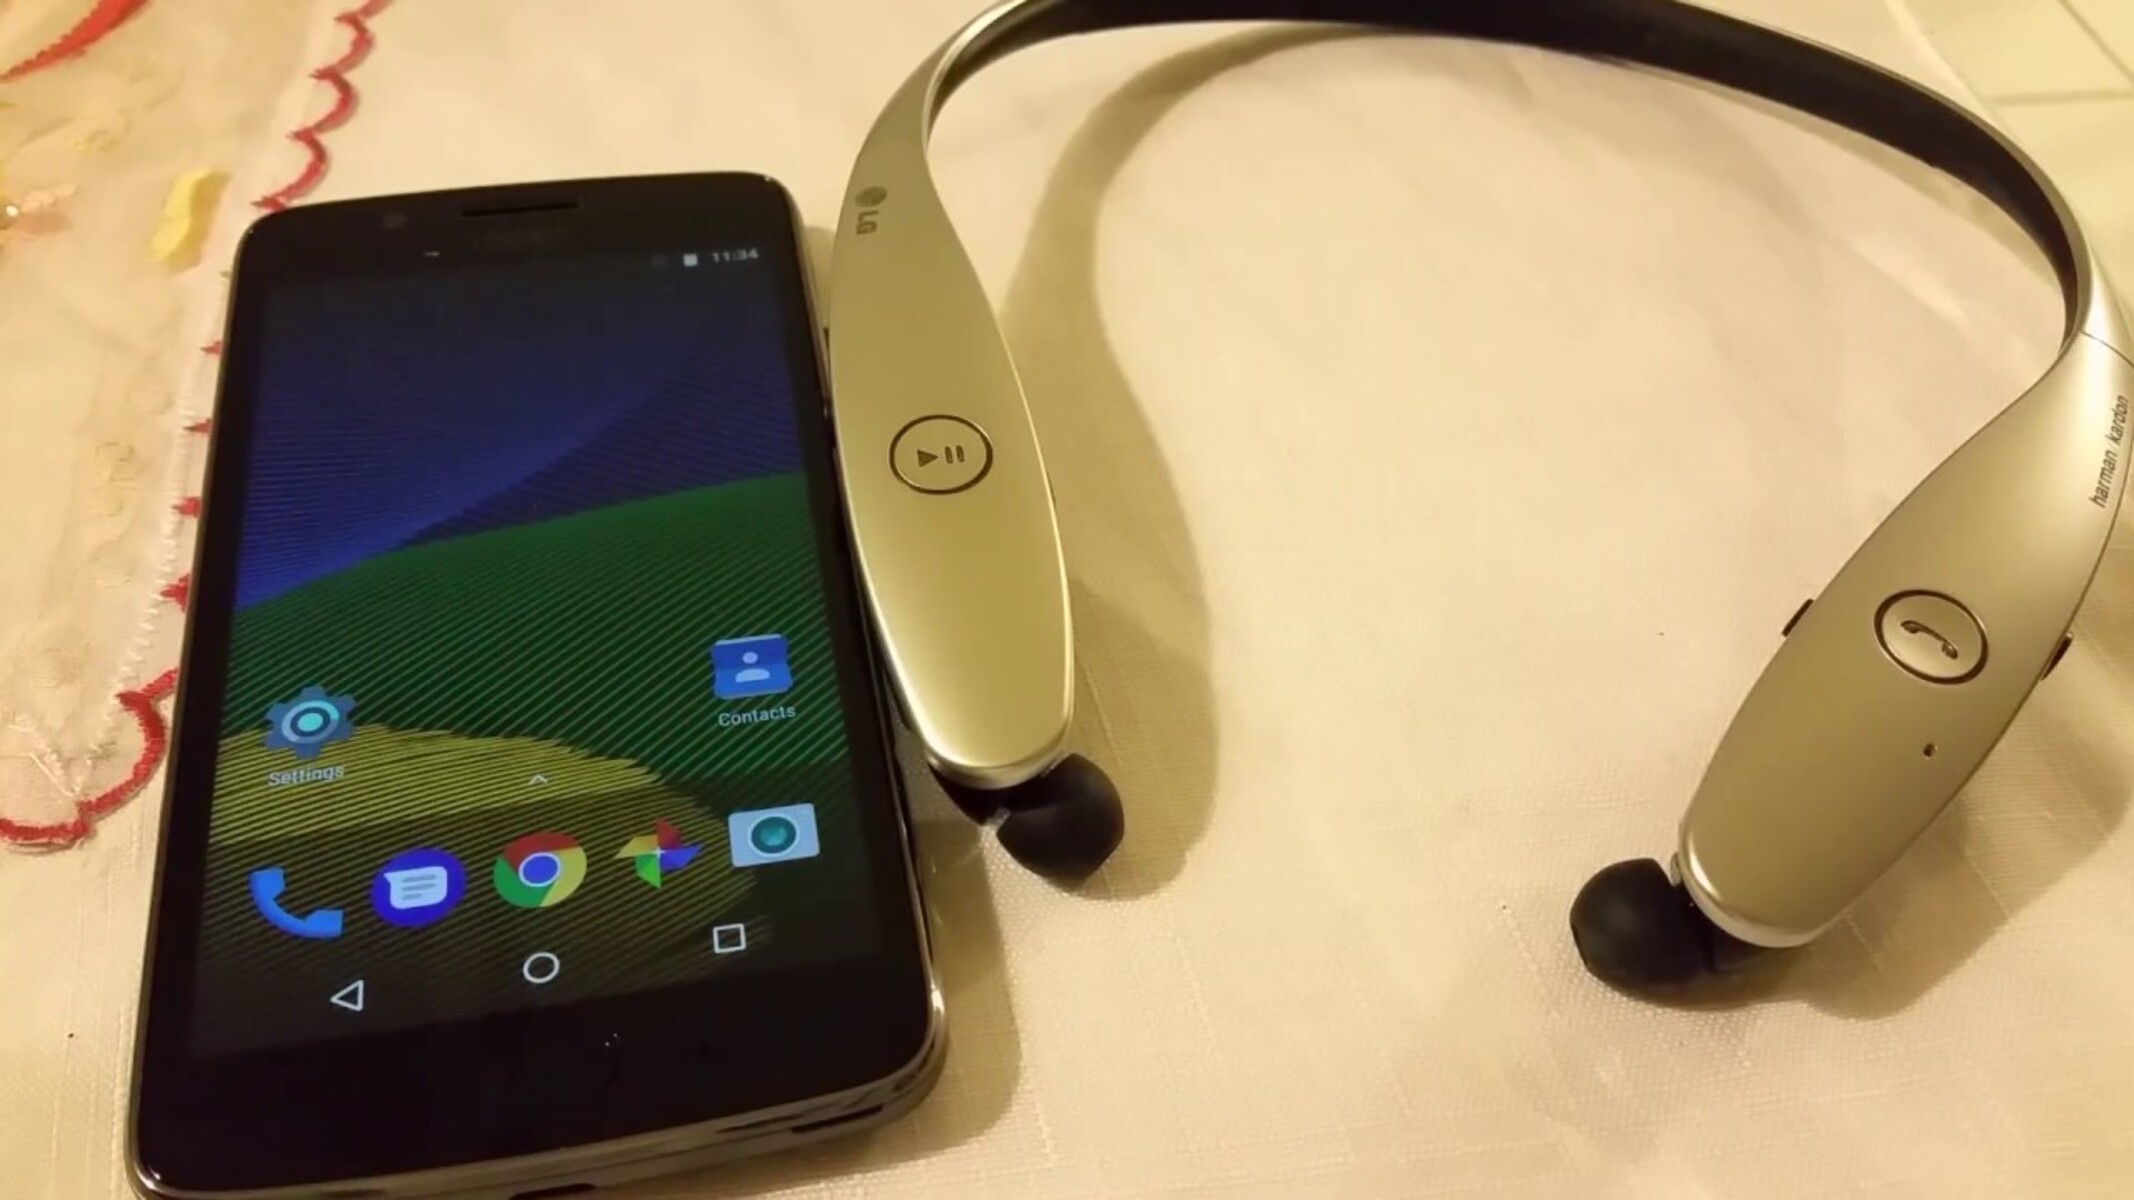 lg-headset-pairing-step-by-step-guide-to-pairing-bluetooth-headset-with-phone